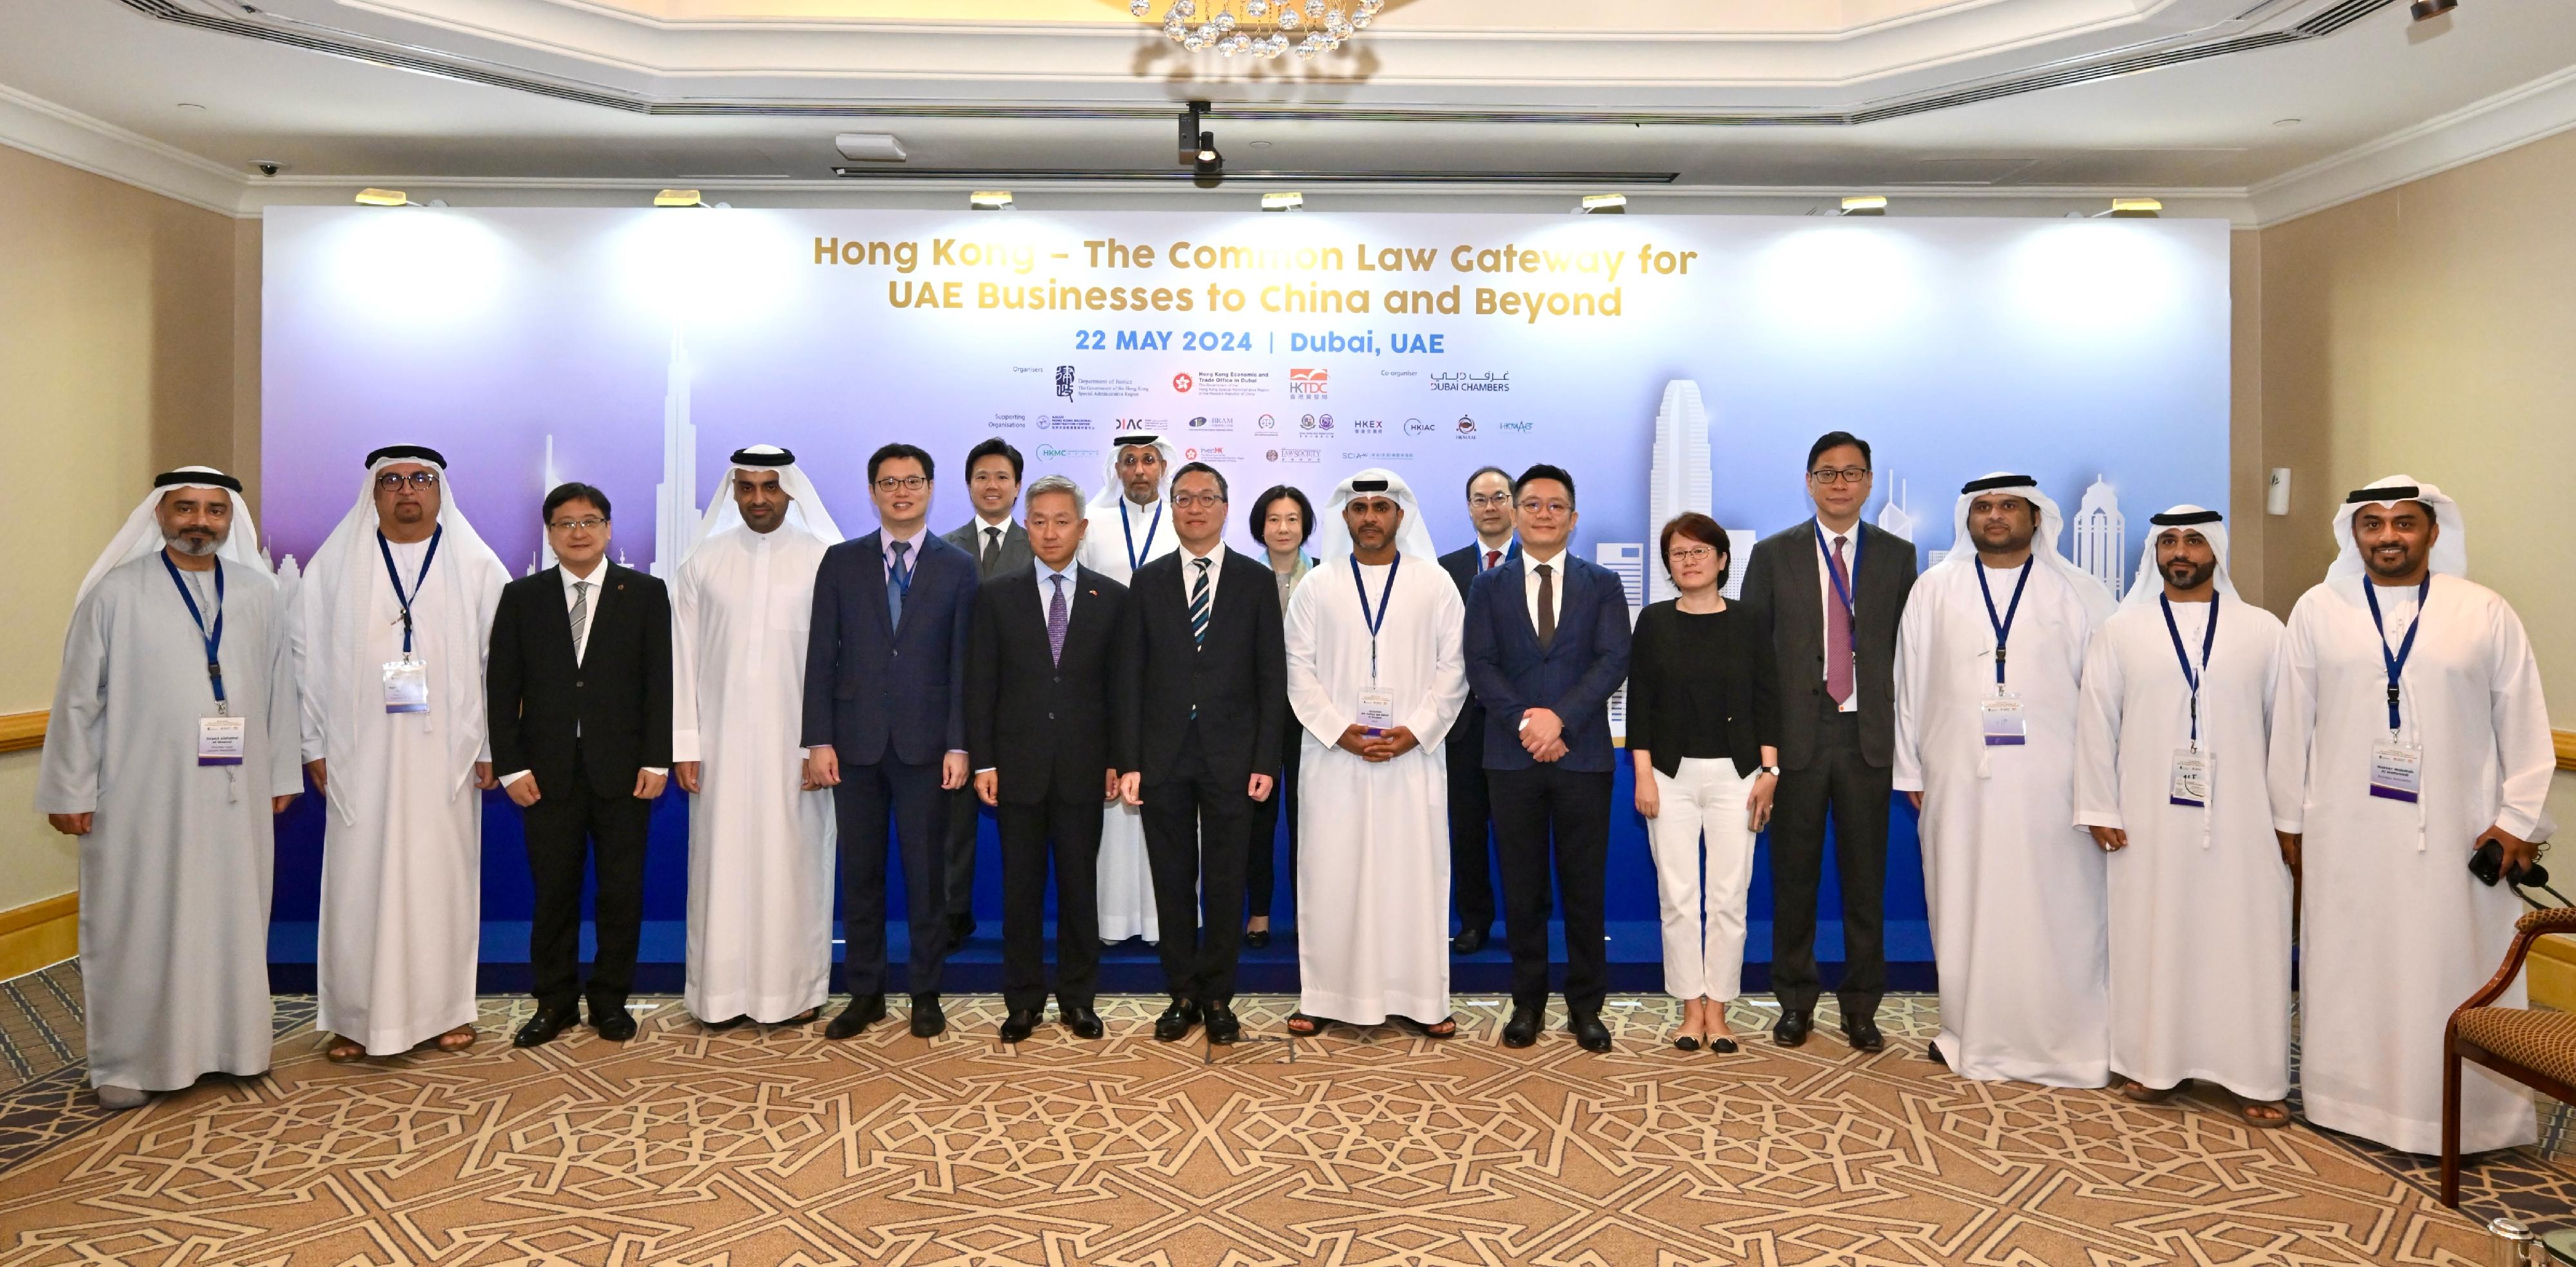 The Secretary for Justice, Mr Paul Lam, SC, continued his visit to Dubai, the United Arab Emirates (UAE), today (May 22, Dubai time) to attend a forum titled Hong Kong - The Common Law Gateway for UAE Businesses to China and Beyond for promoting Hong Kong's legal and dispute resolution services. Photo shows Mr Lam (front row, seventh left); Ambassador Extraordinary and Plenipotentiary of the People's Republic of China to the UAE, Mr Zhang Yiming (front row, sixth left); and the delegation with the Minister of Justice of the UAE, Mr Abdullah bin Sultan bin Awad Al Nuaimi (front row, seventh right), and other guests at the forum.
